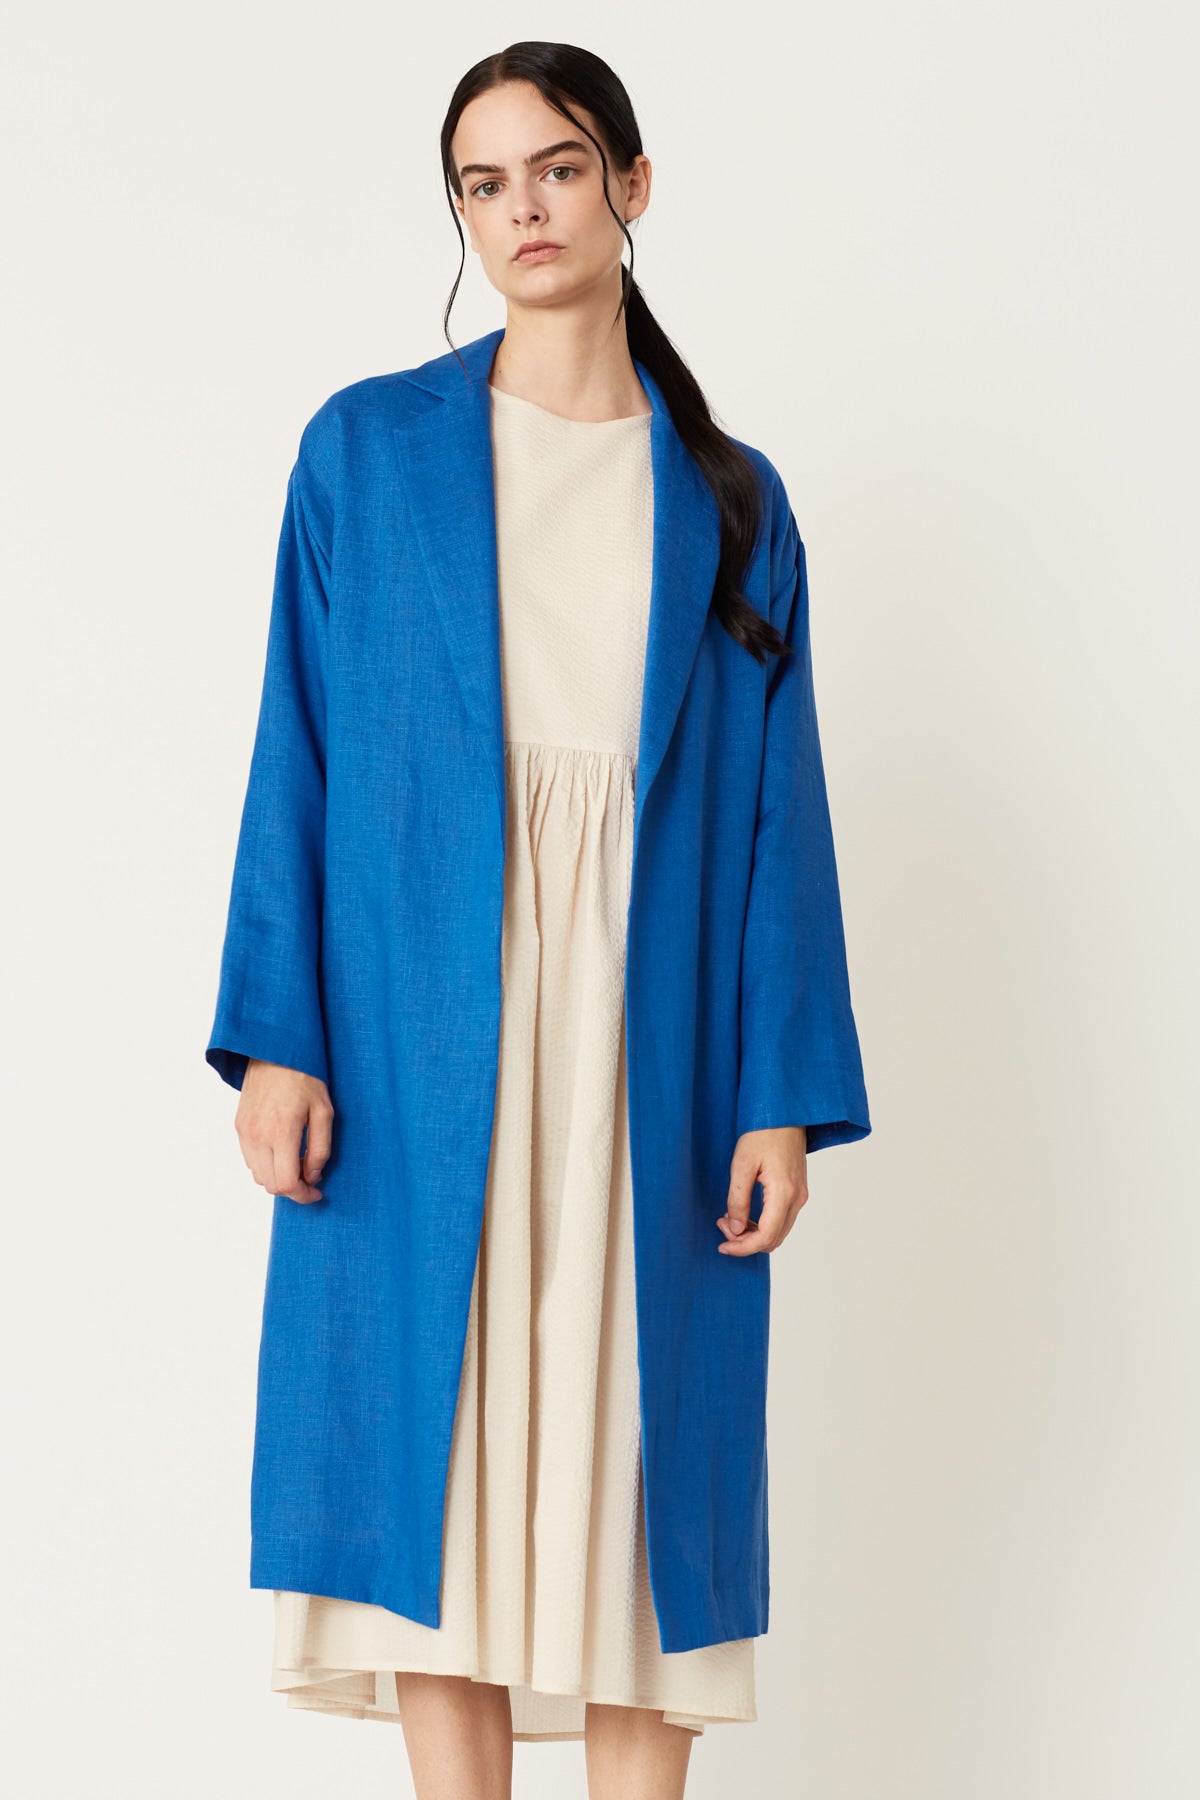 Ms. Rosalee Linen Long Sleeve Coat in Azure Linen. Made in Atlanta, ethically and sustainably, by slow fashion designer Megan Huntz. 